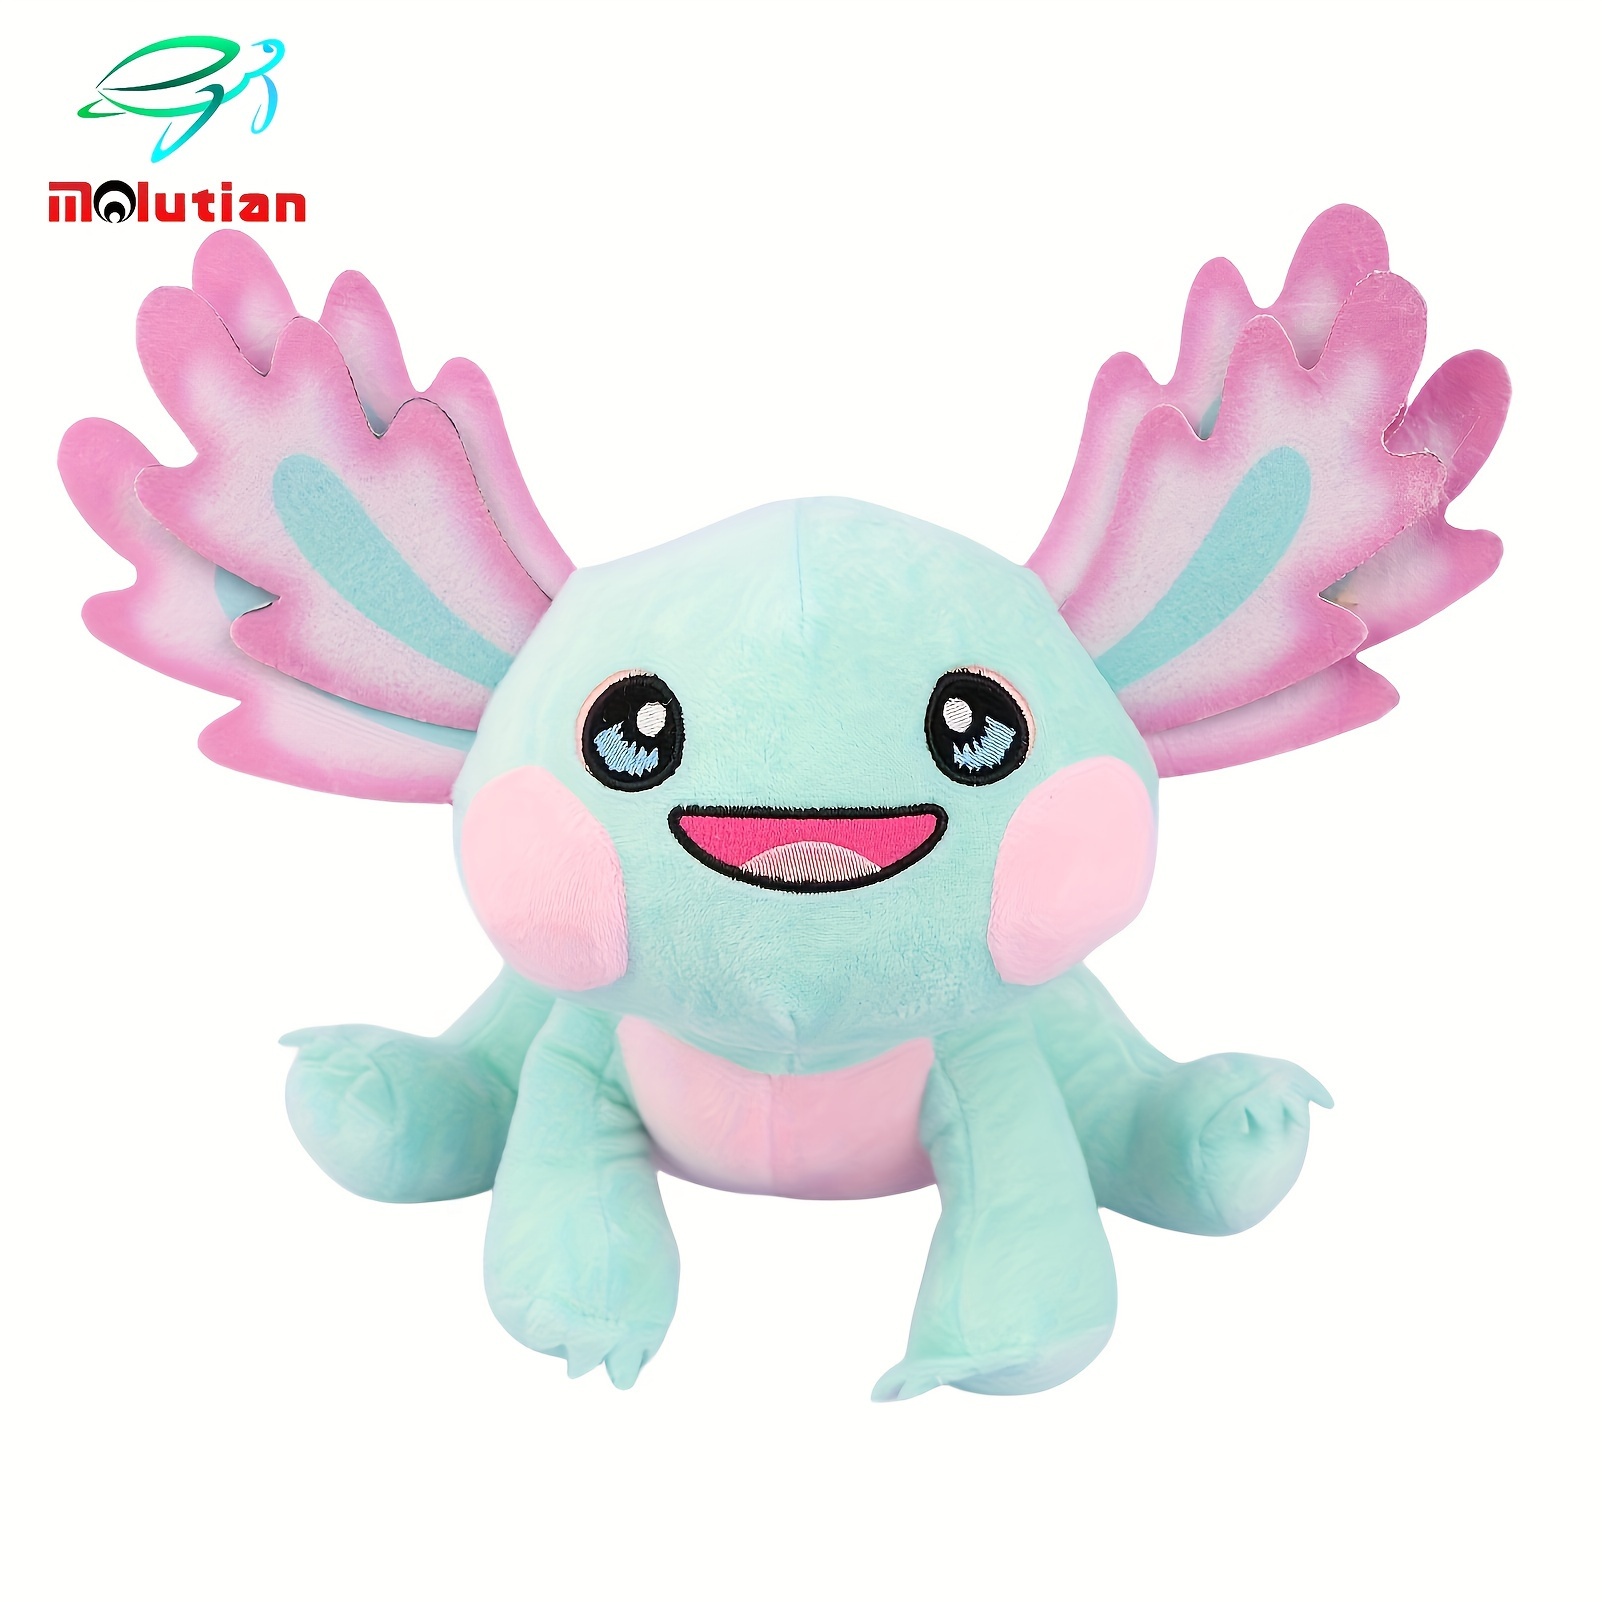 

Adorable 30cm/11.81in Cartoon Green Axolotl Plush Toy - Perfect Gift For Kids & Family Decorations!